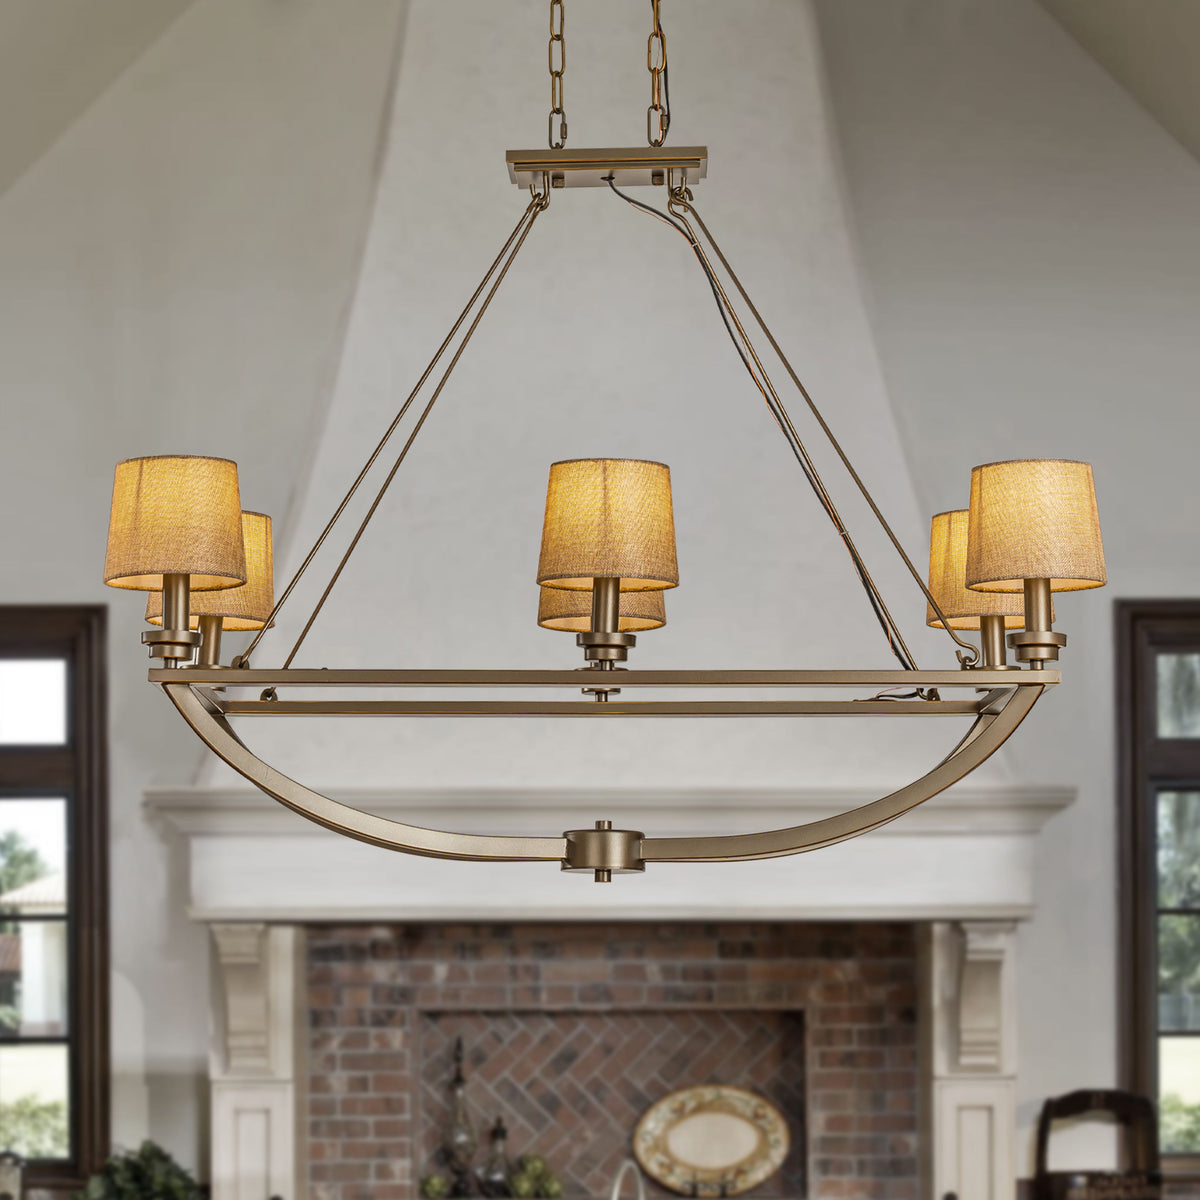 Traditionally Oil-Rubbed Bronze Chandelier with Warm Fabric Shades